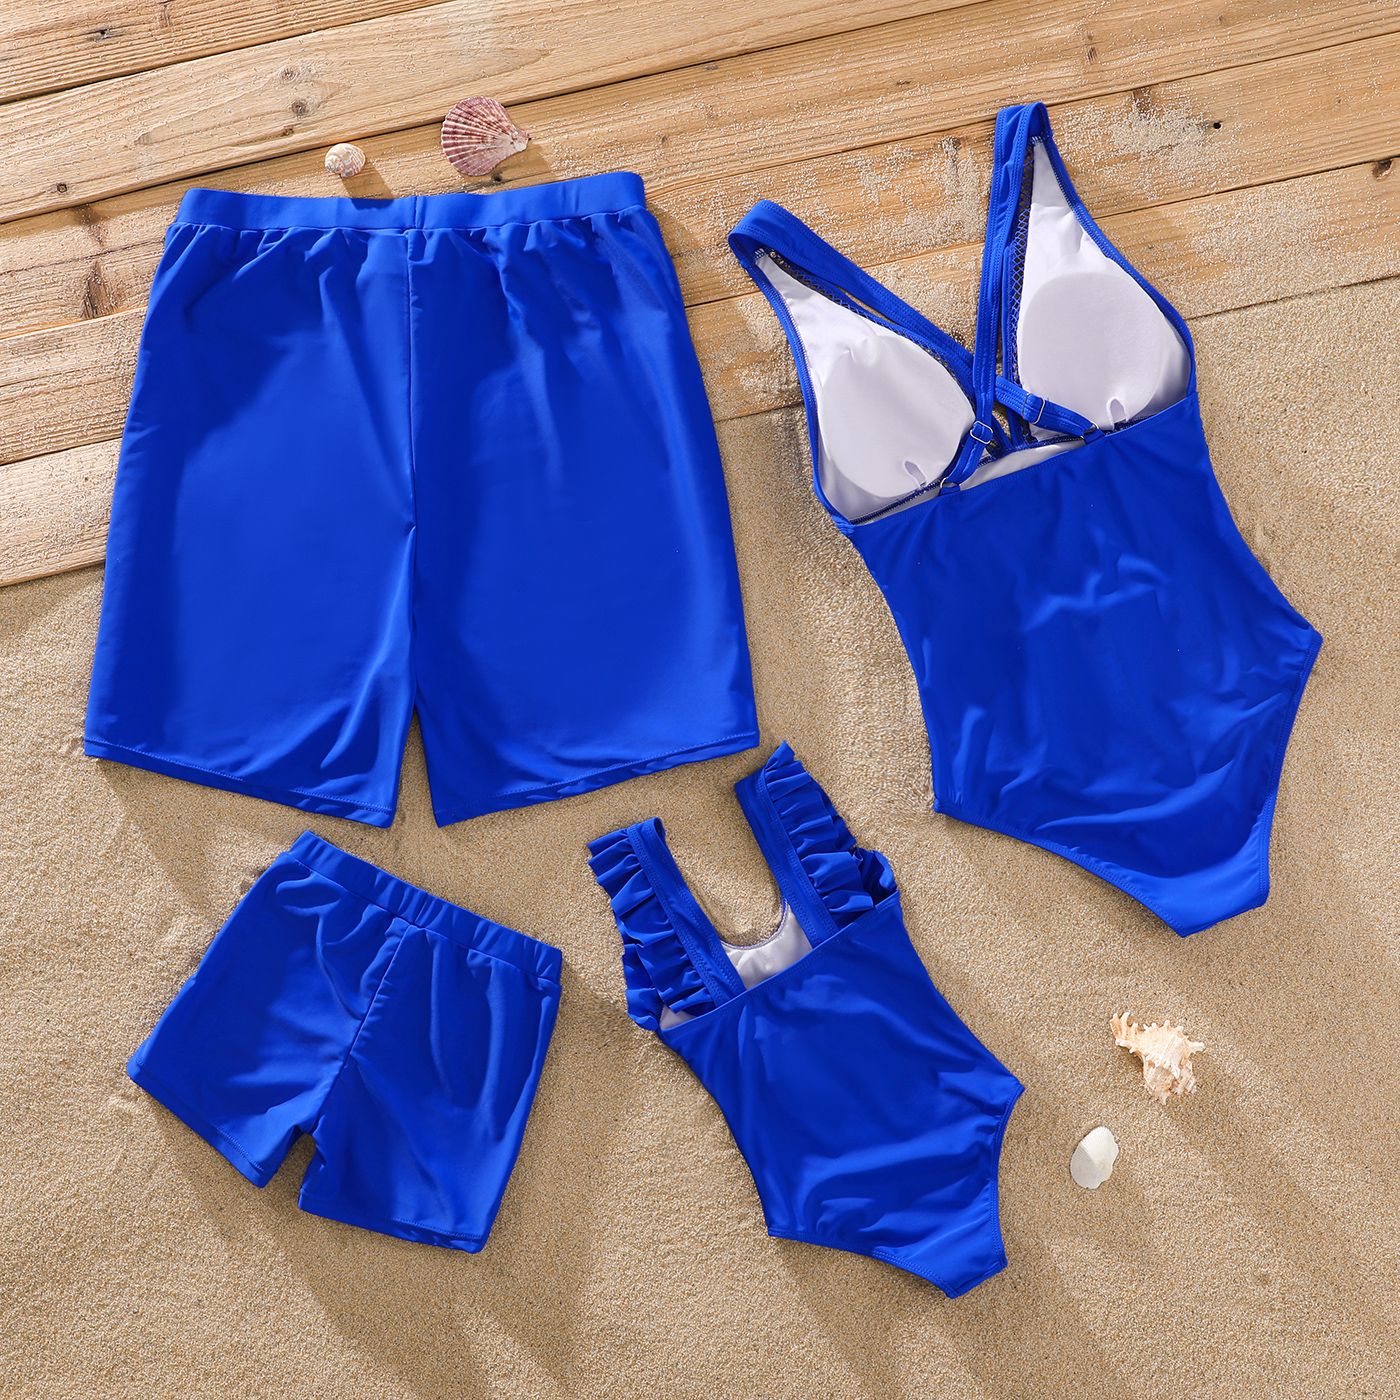 

Family Matching Stripe Spliced One Piece Swimsuit or Swim Trunks Shorts